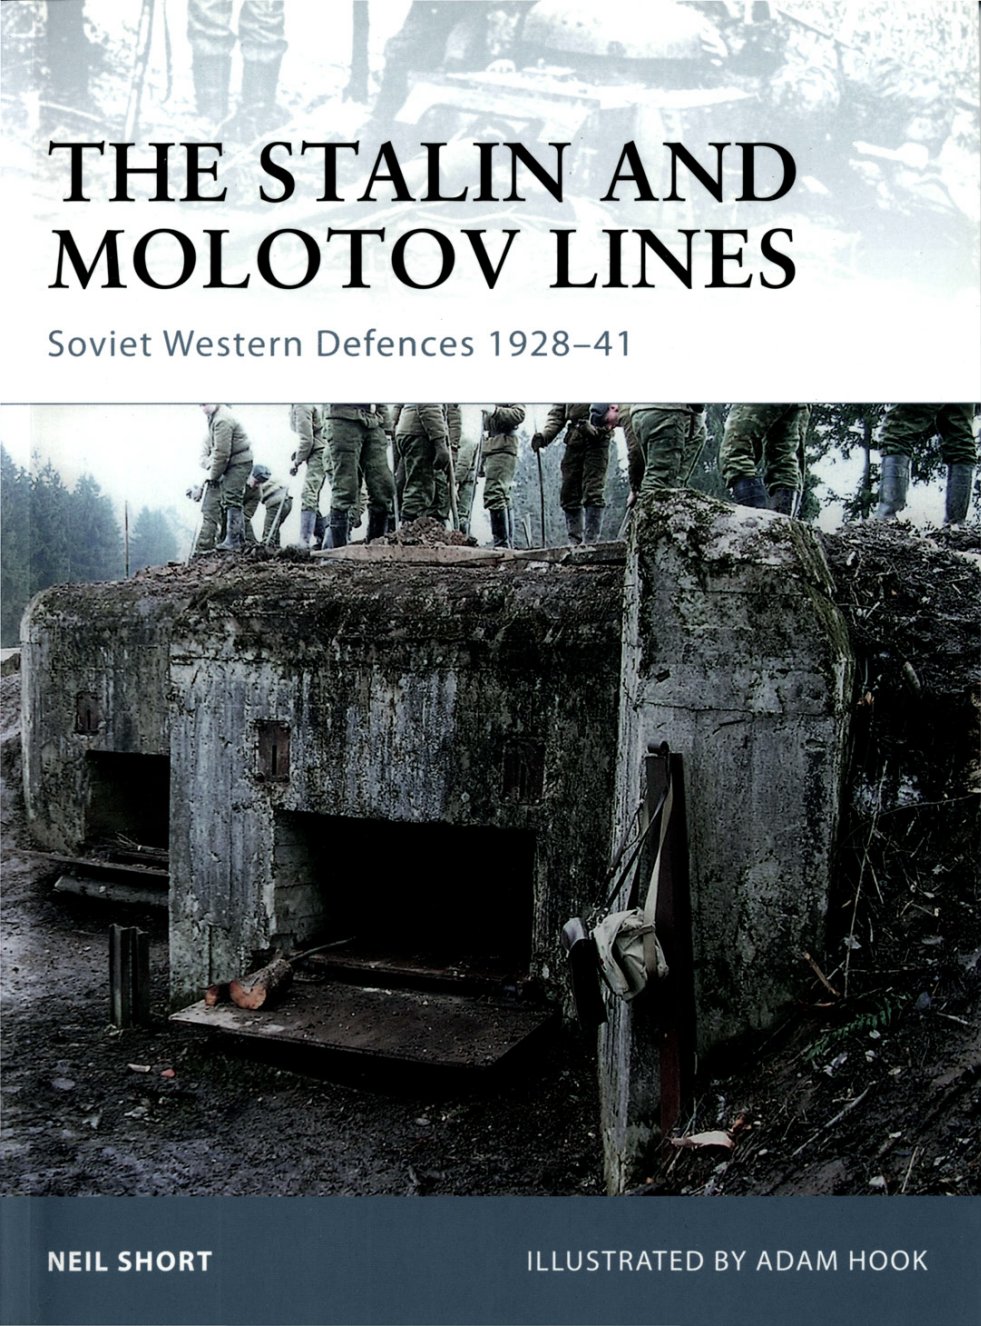 World War II3 - Osprey - Fortress 77 - The Stalin and Molotov Lines, Soviet Western Defences 1926-41 2008.jpg